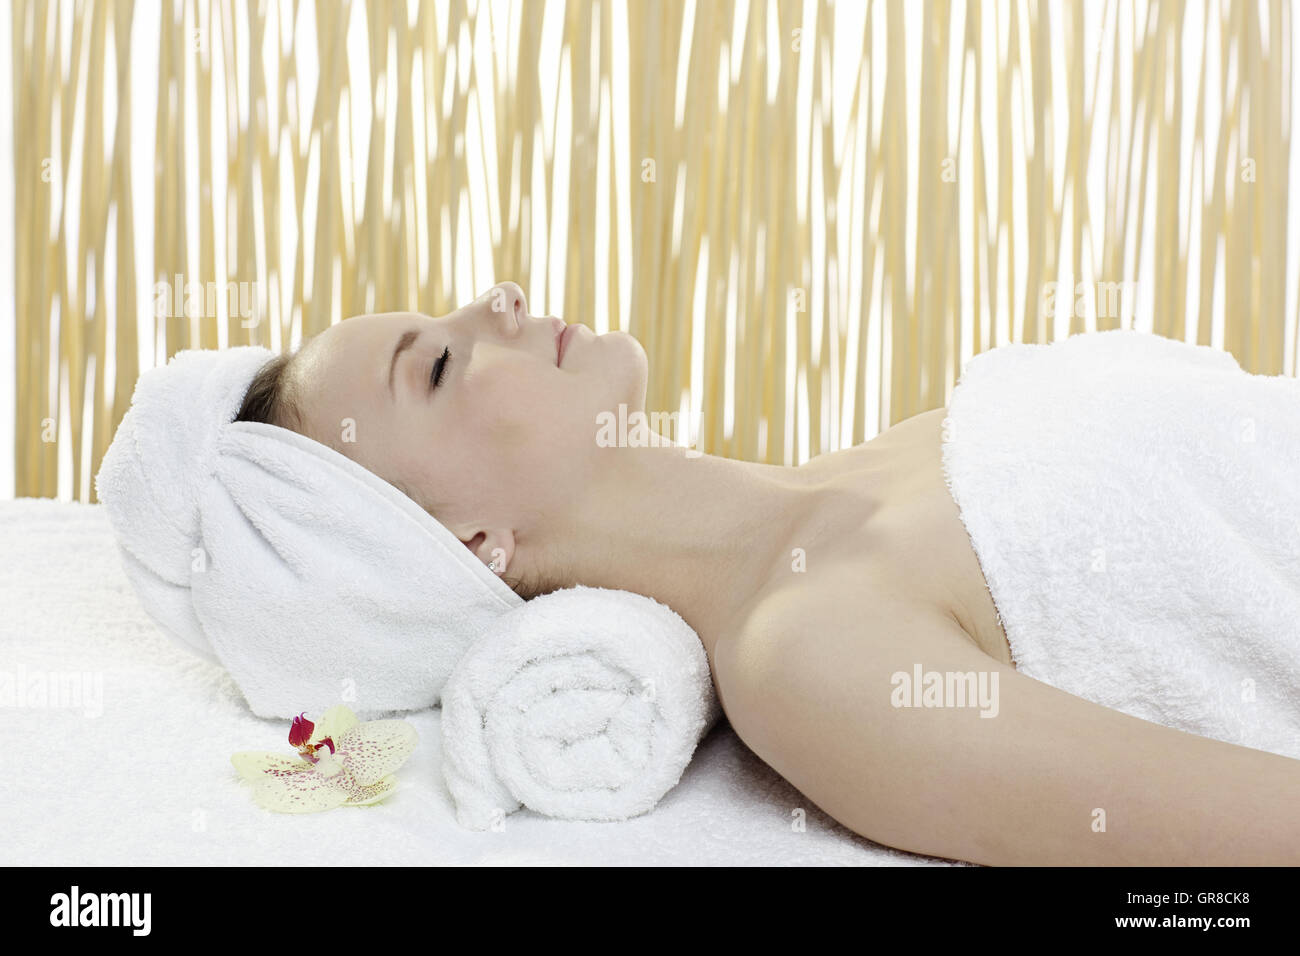 Young Attractive Woman At A Wellness Massage Stock Photo